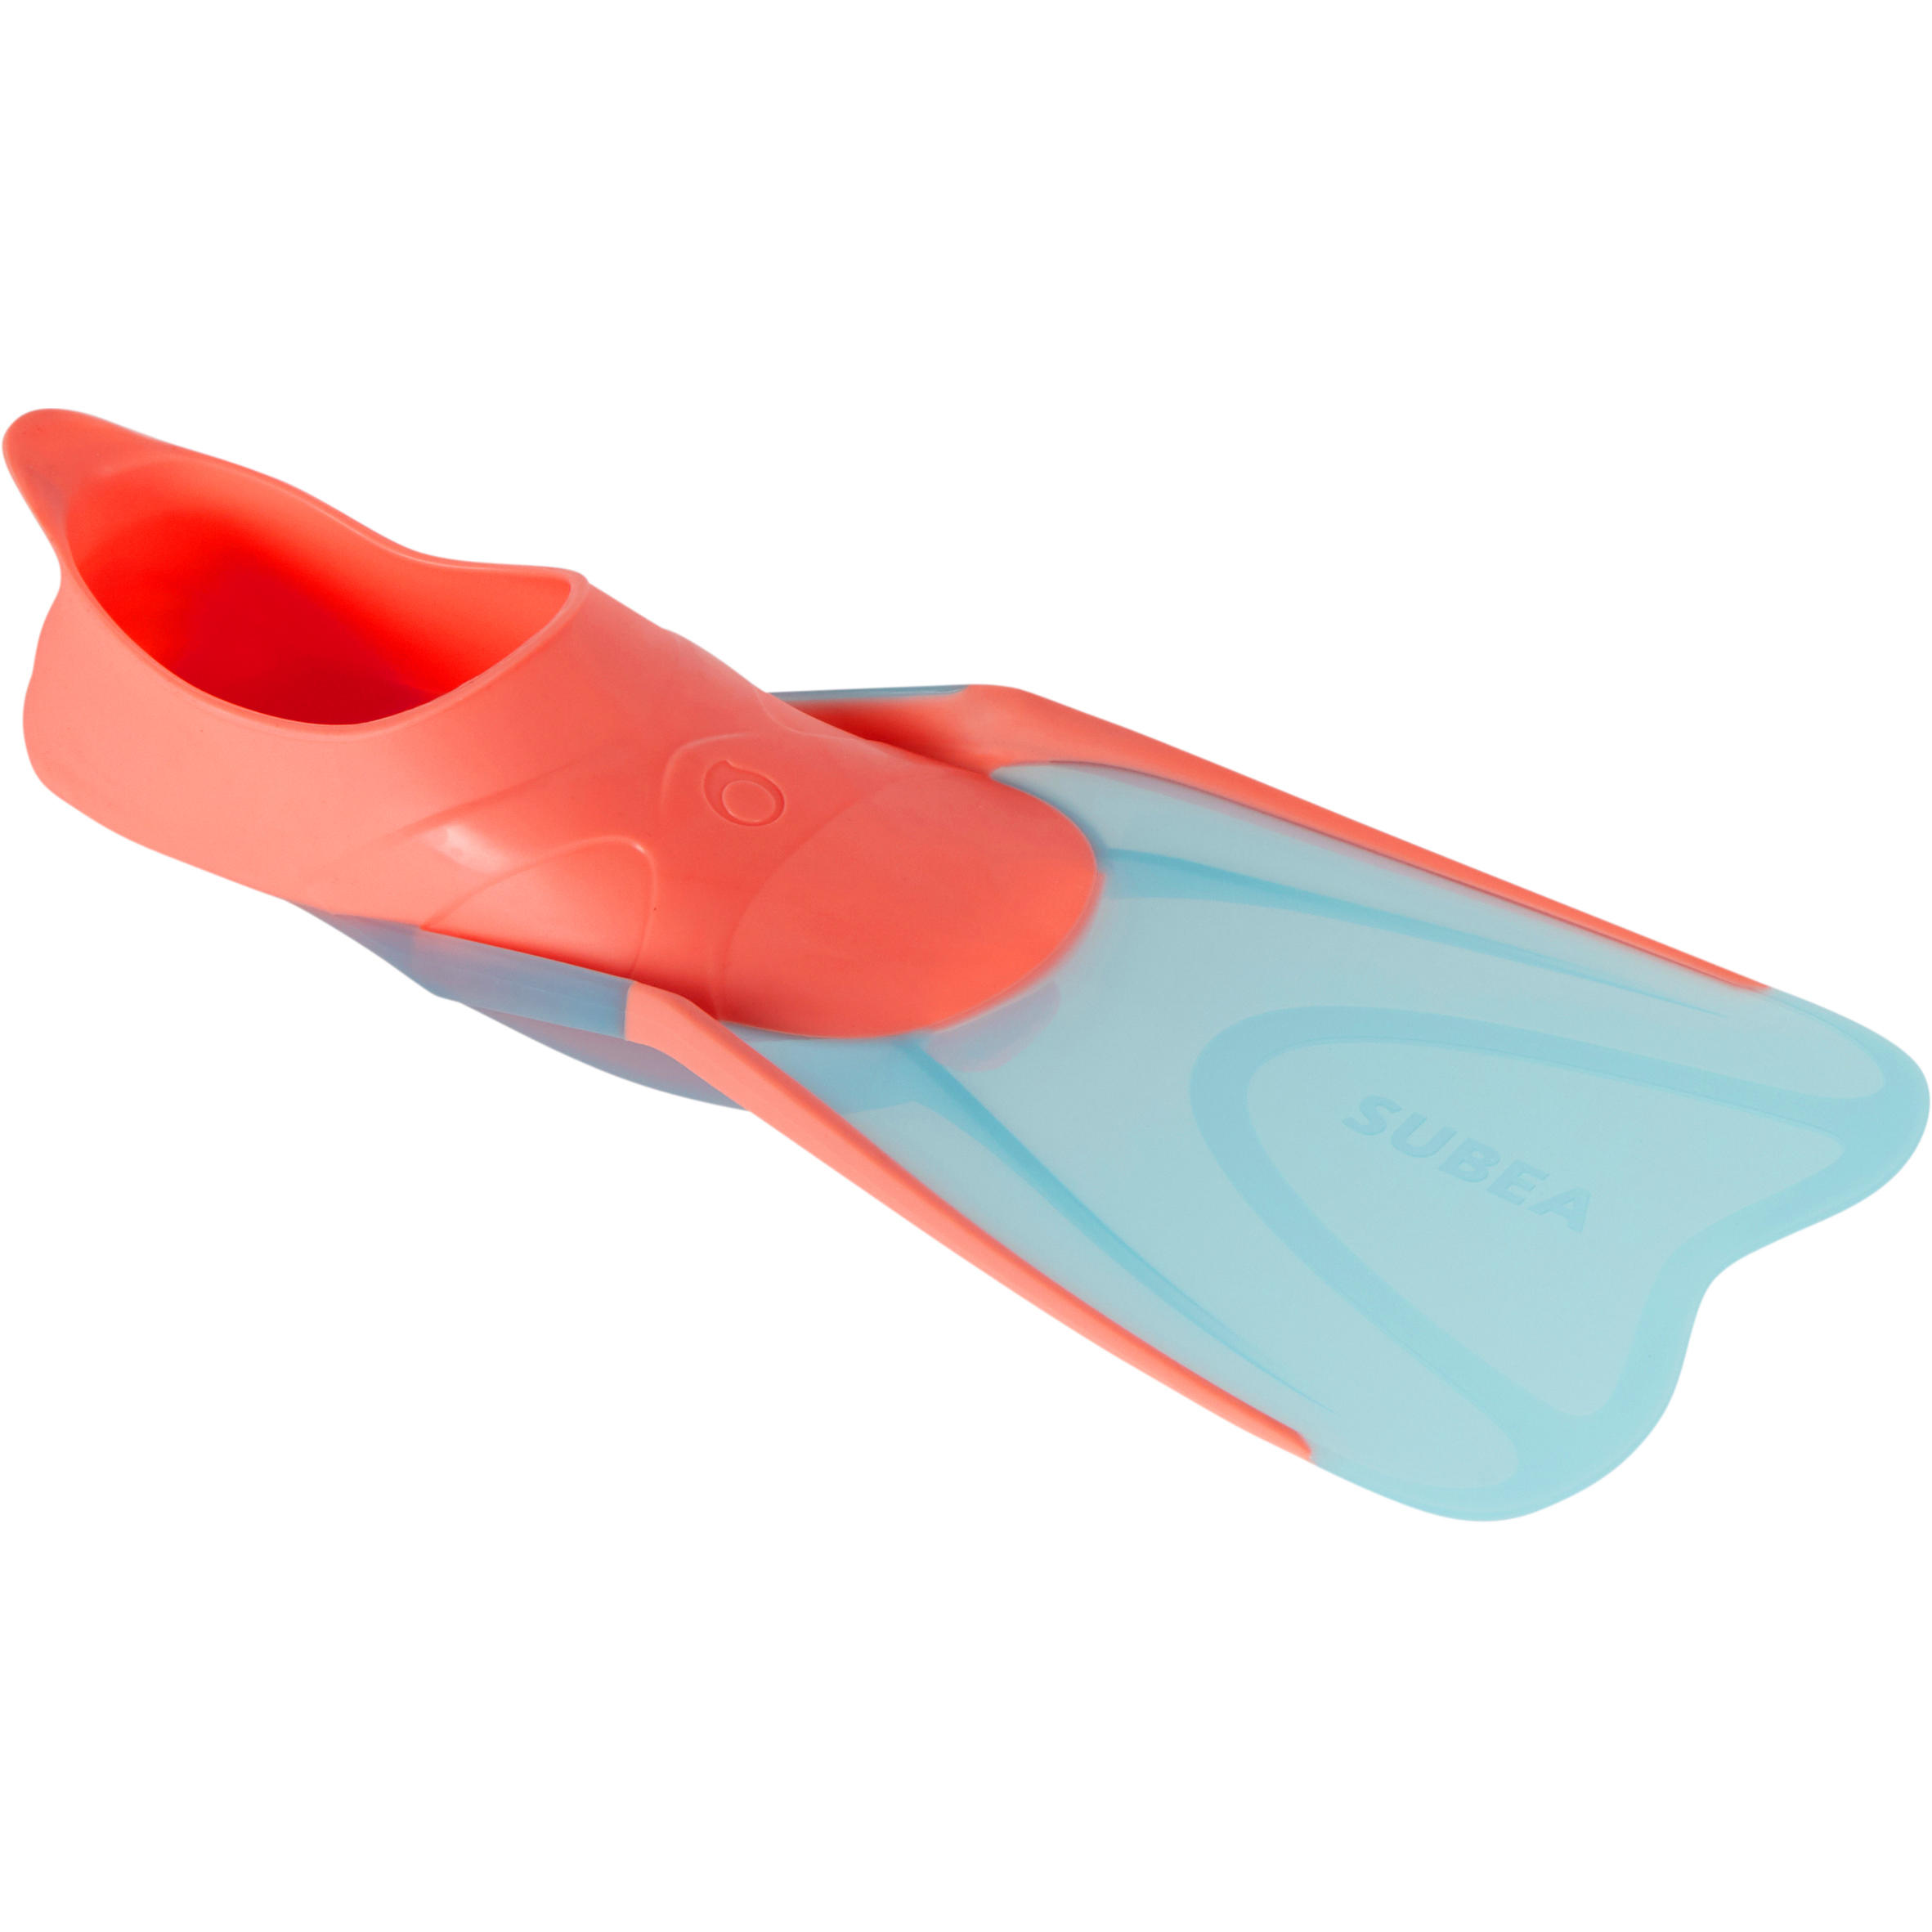 SUBEA Diving Fins - FF 100 Turquoise and Coral